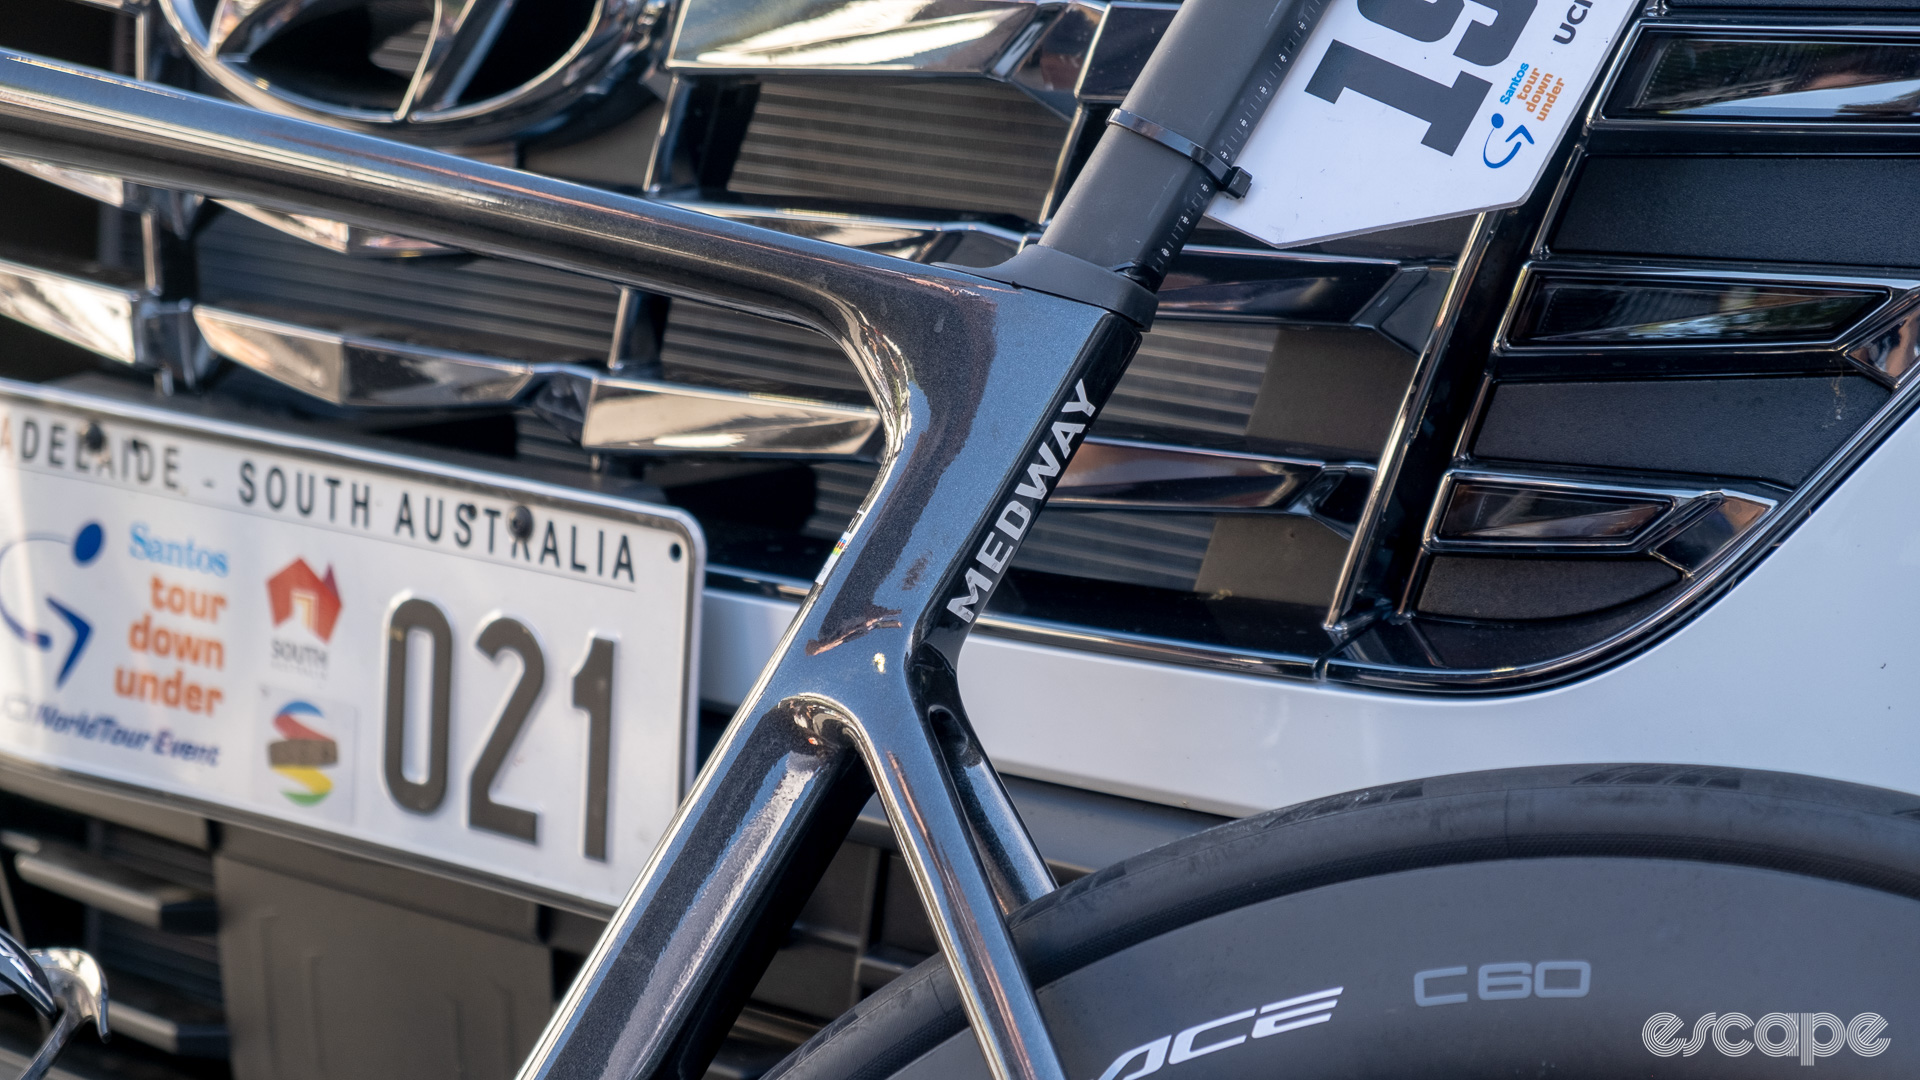 The photo shows Jackson Medway's name on his Cervelo Soloist.